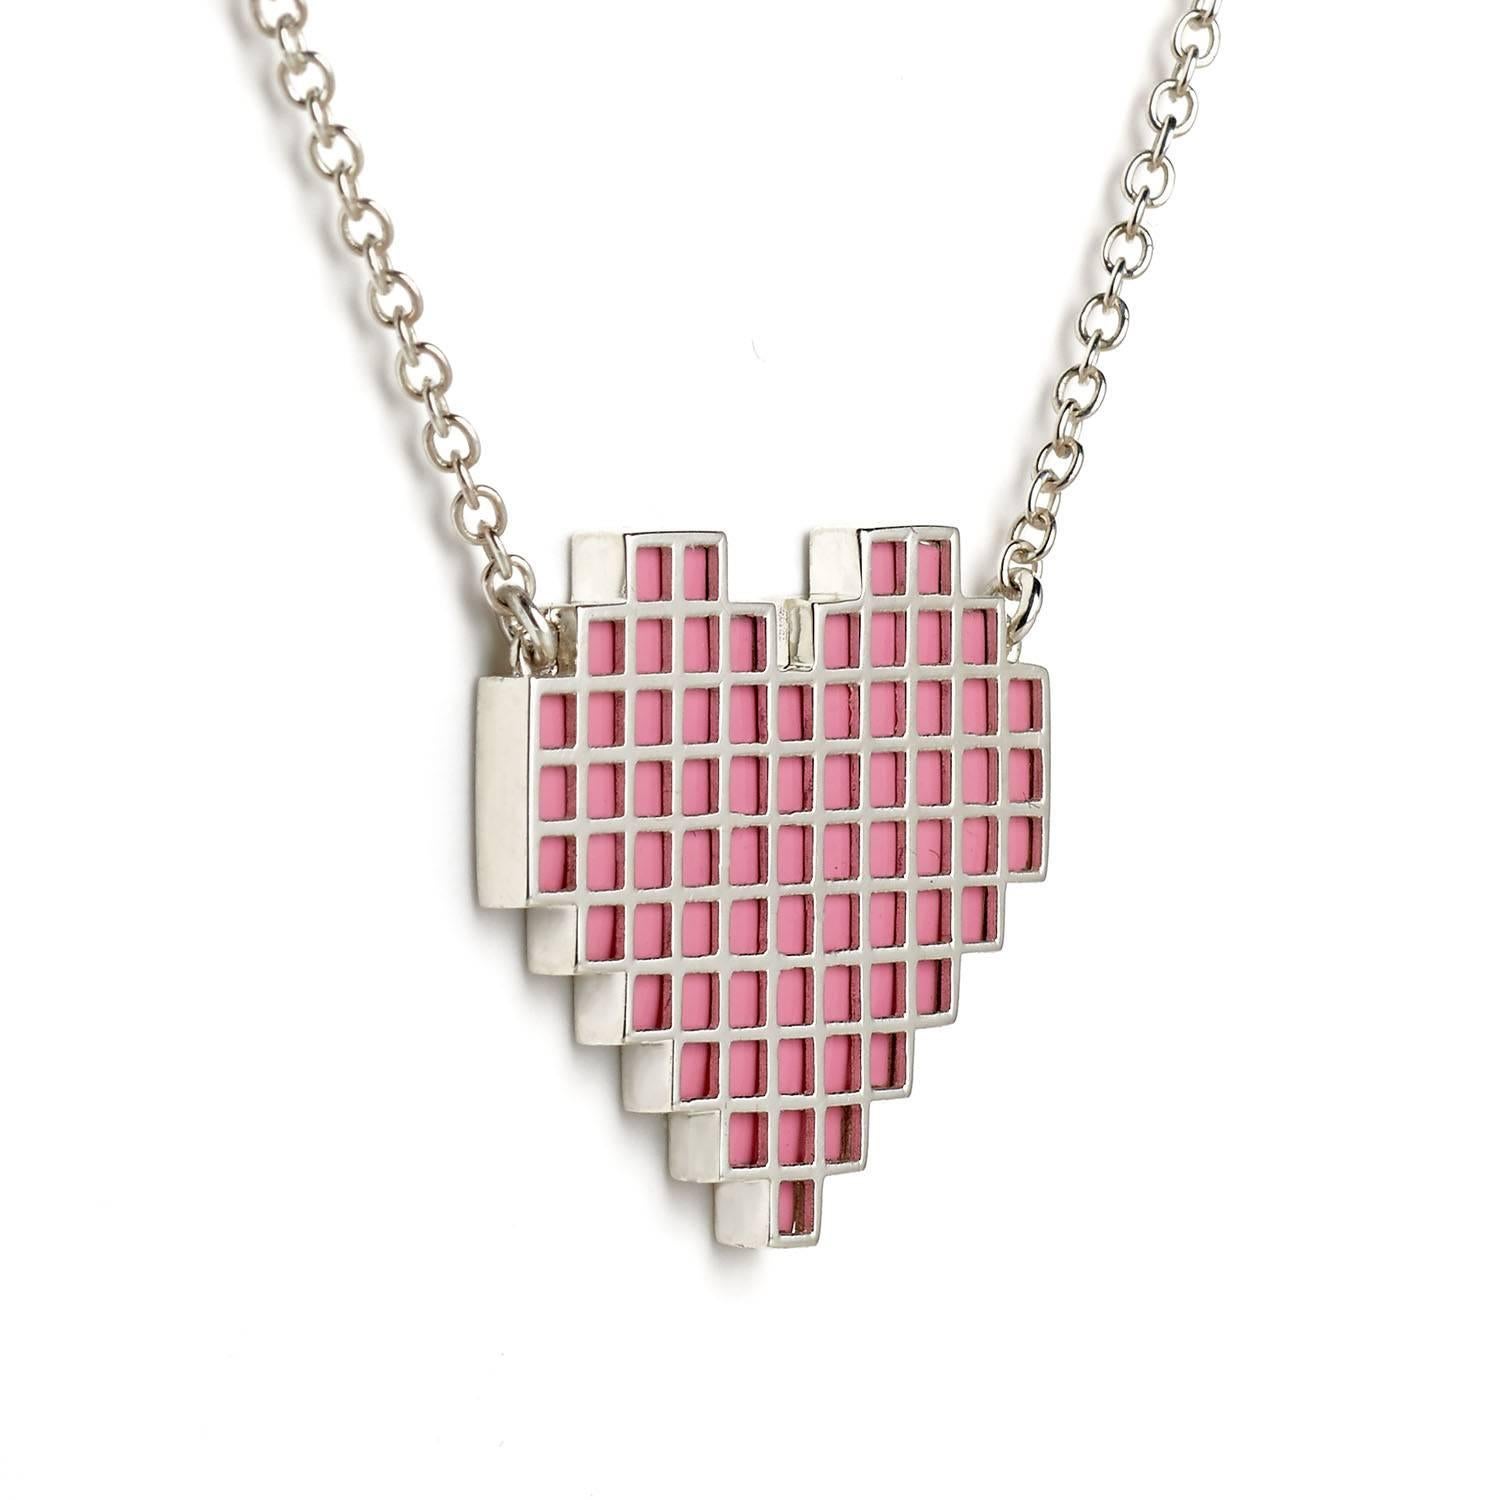 Silver and enamel reversible Pixel Heart necklace by Francesca Grima

Silver set with Enamel on Silver chain

・Polished Silver
・Reversible Bubblegum/Carbon Enamel
・Pendant length: 2.2cm
・Pendant width: 2.2cm
・Chain can be worn in three lengths: